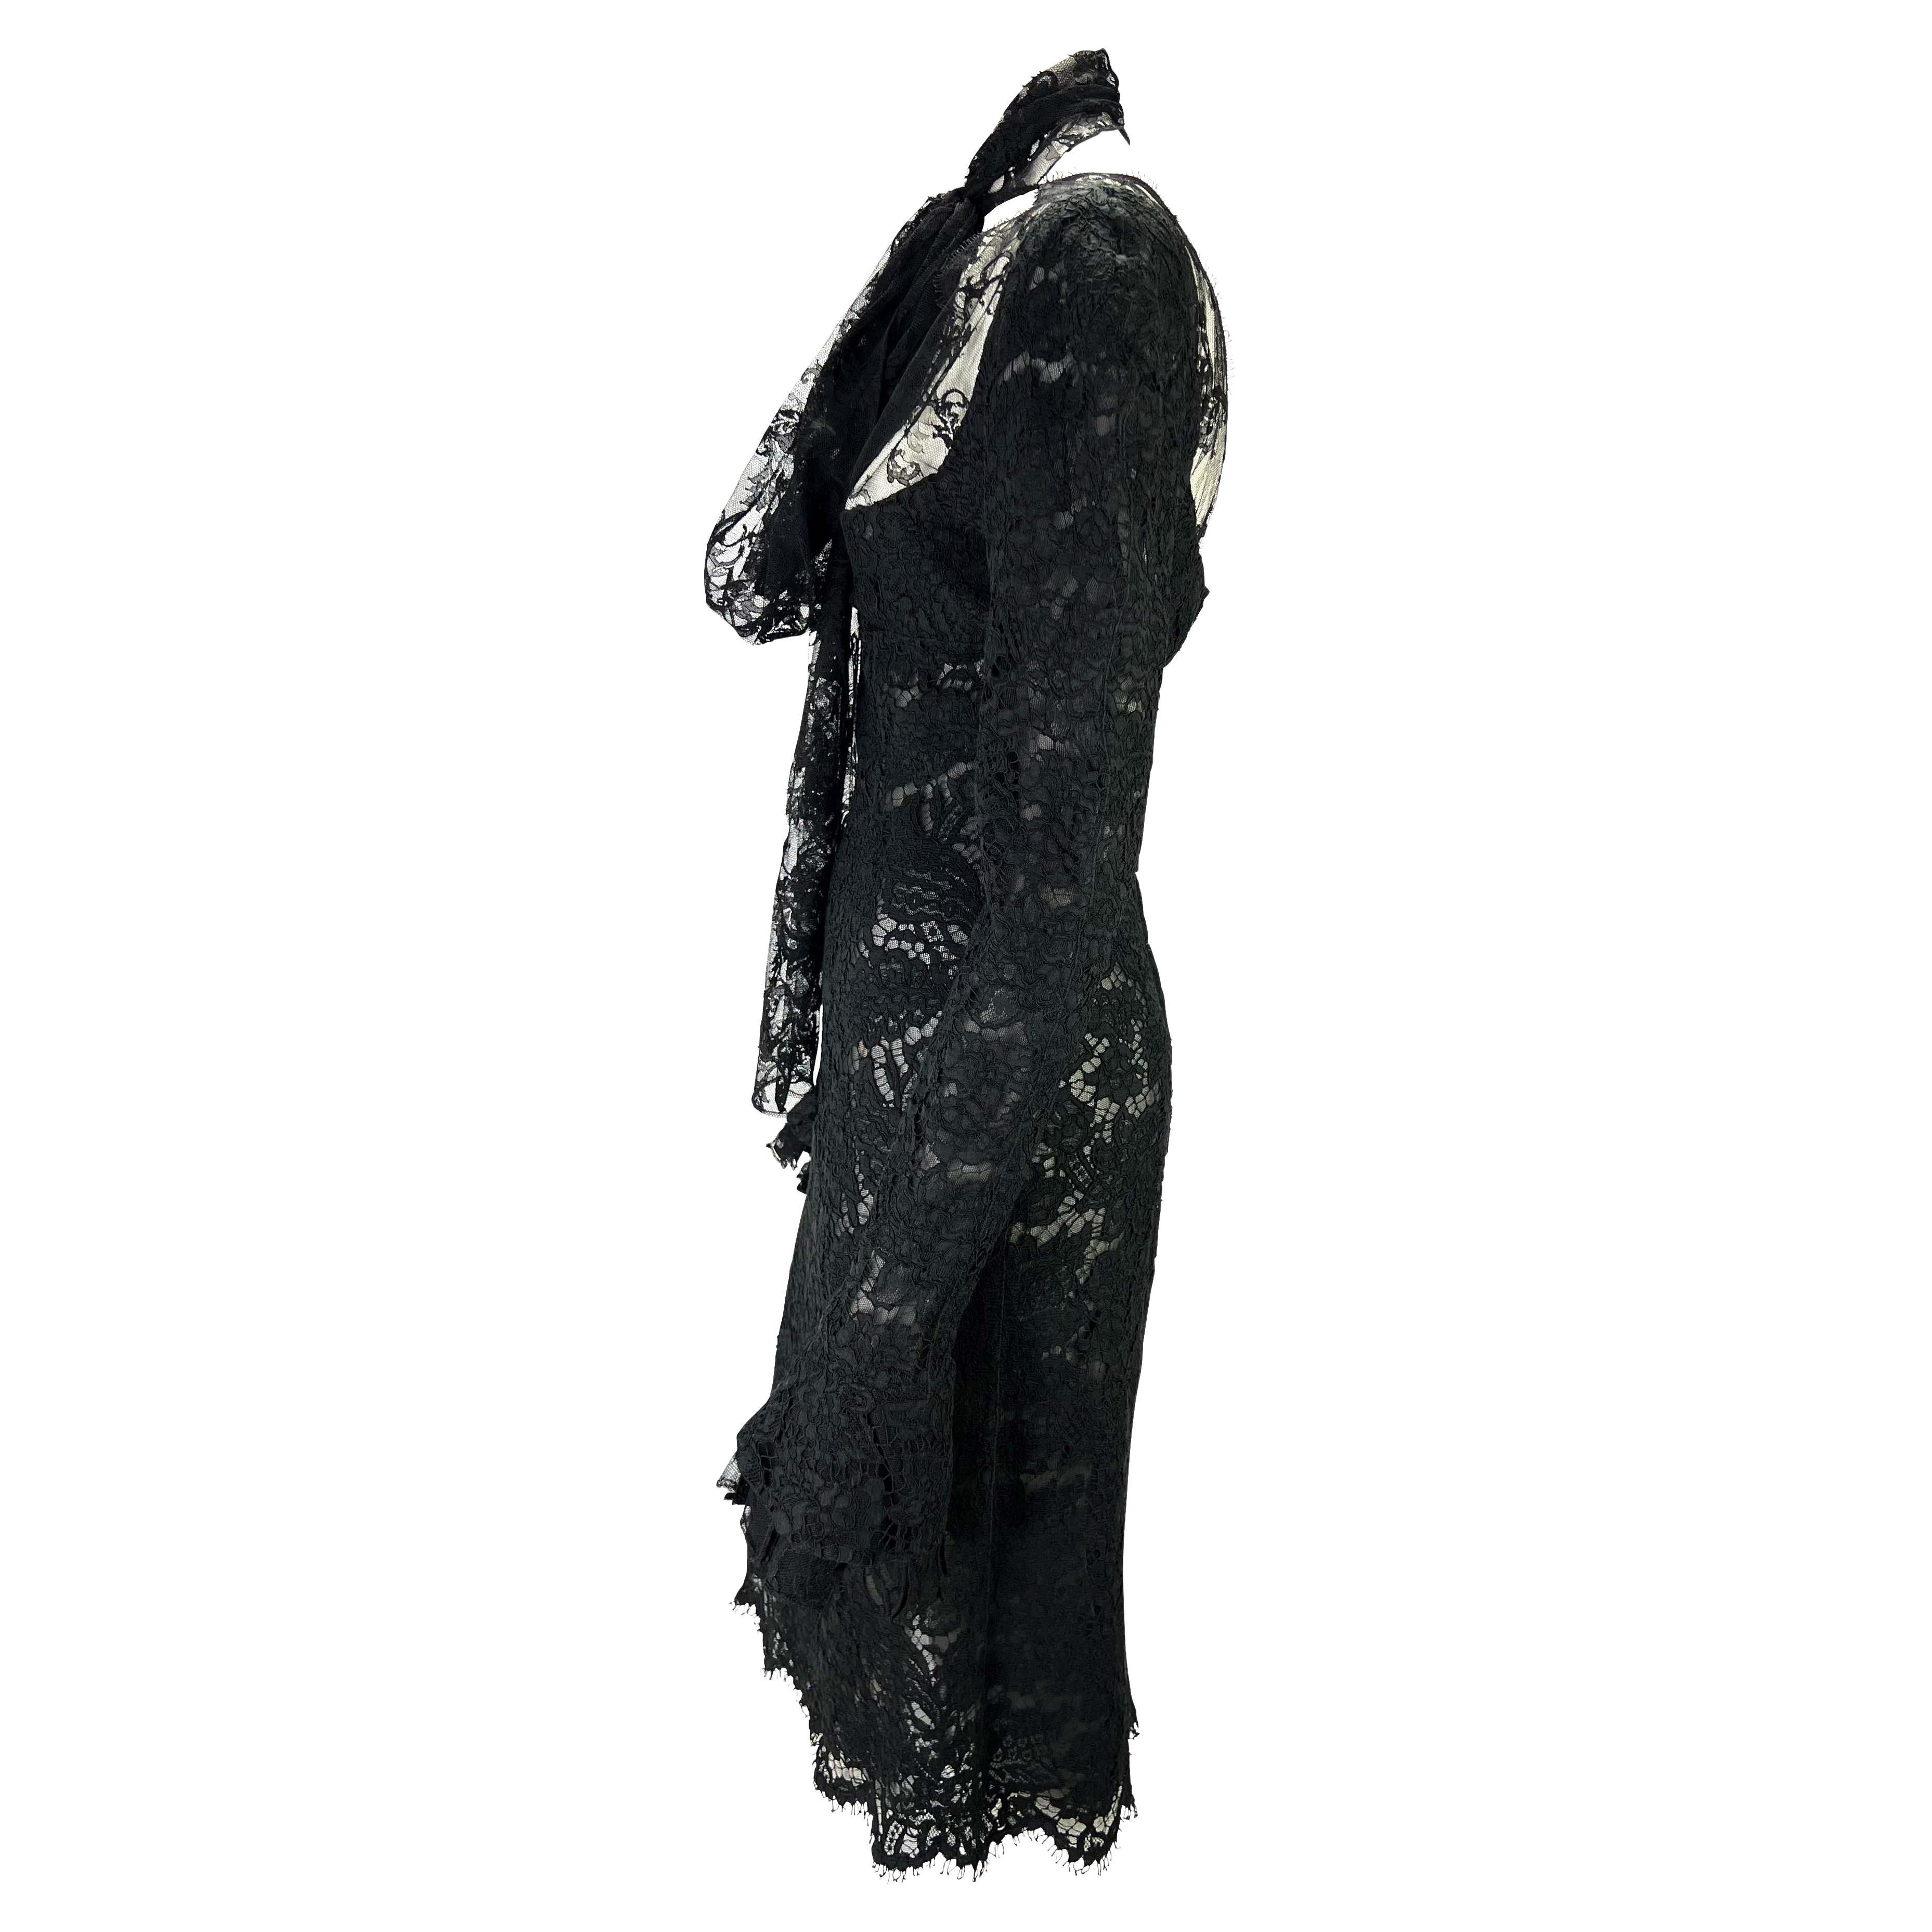 F/W 2002 Yves Saint Laurent by Tom Ford Runway Sheer Black Lace Poet's Dress In Excellent Condition For Sale In West Hollywood, CA